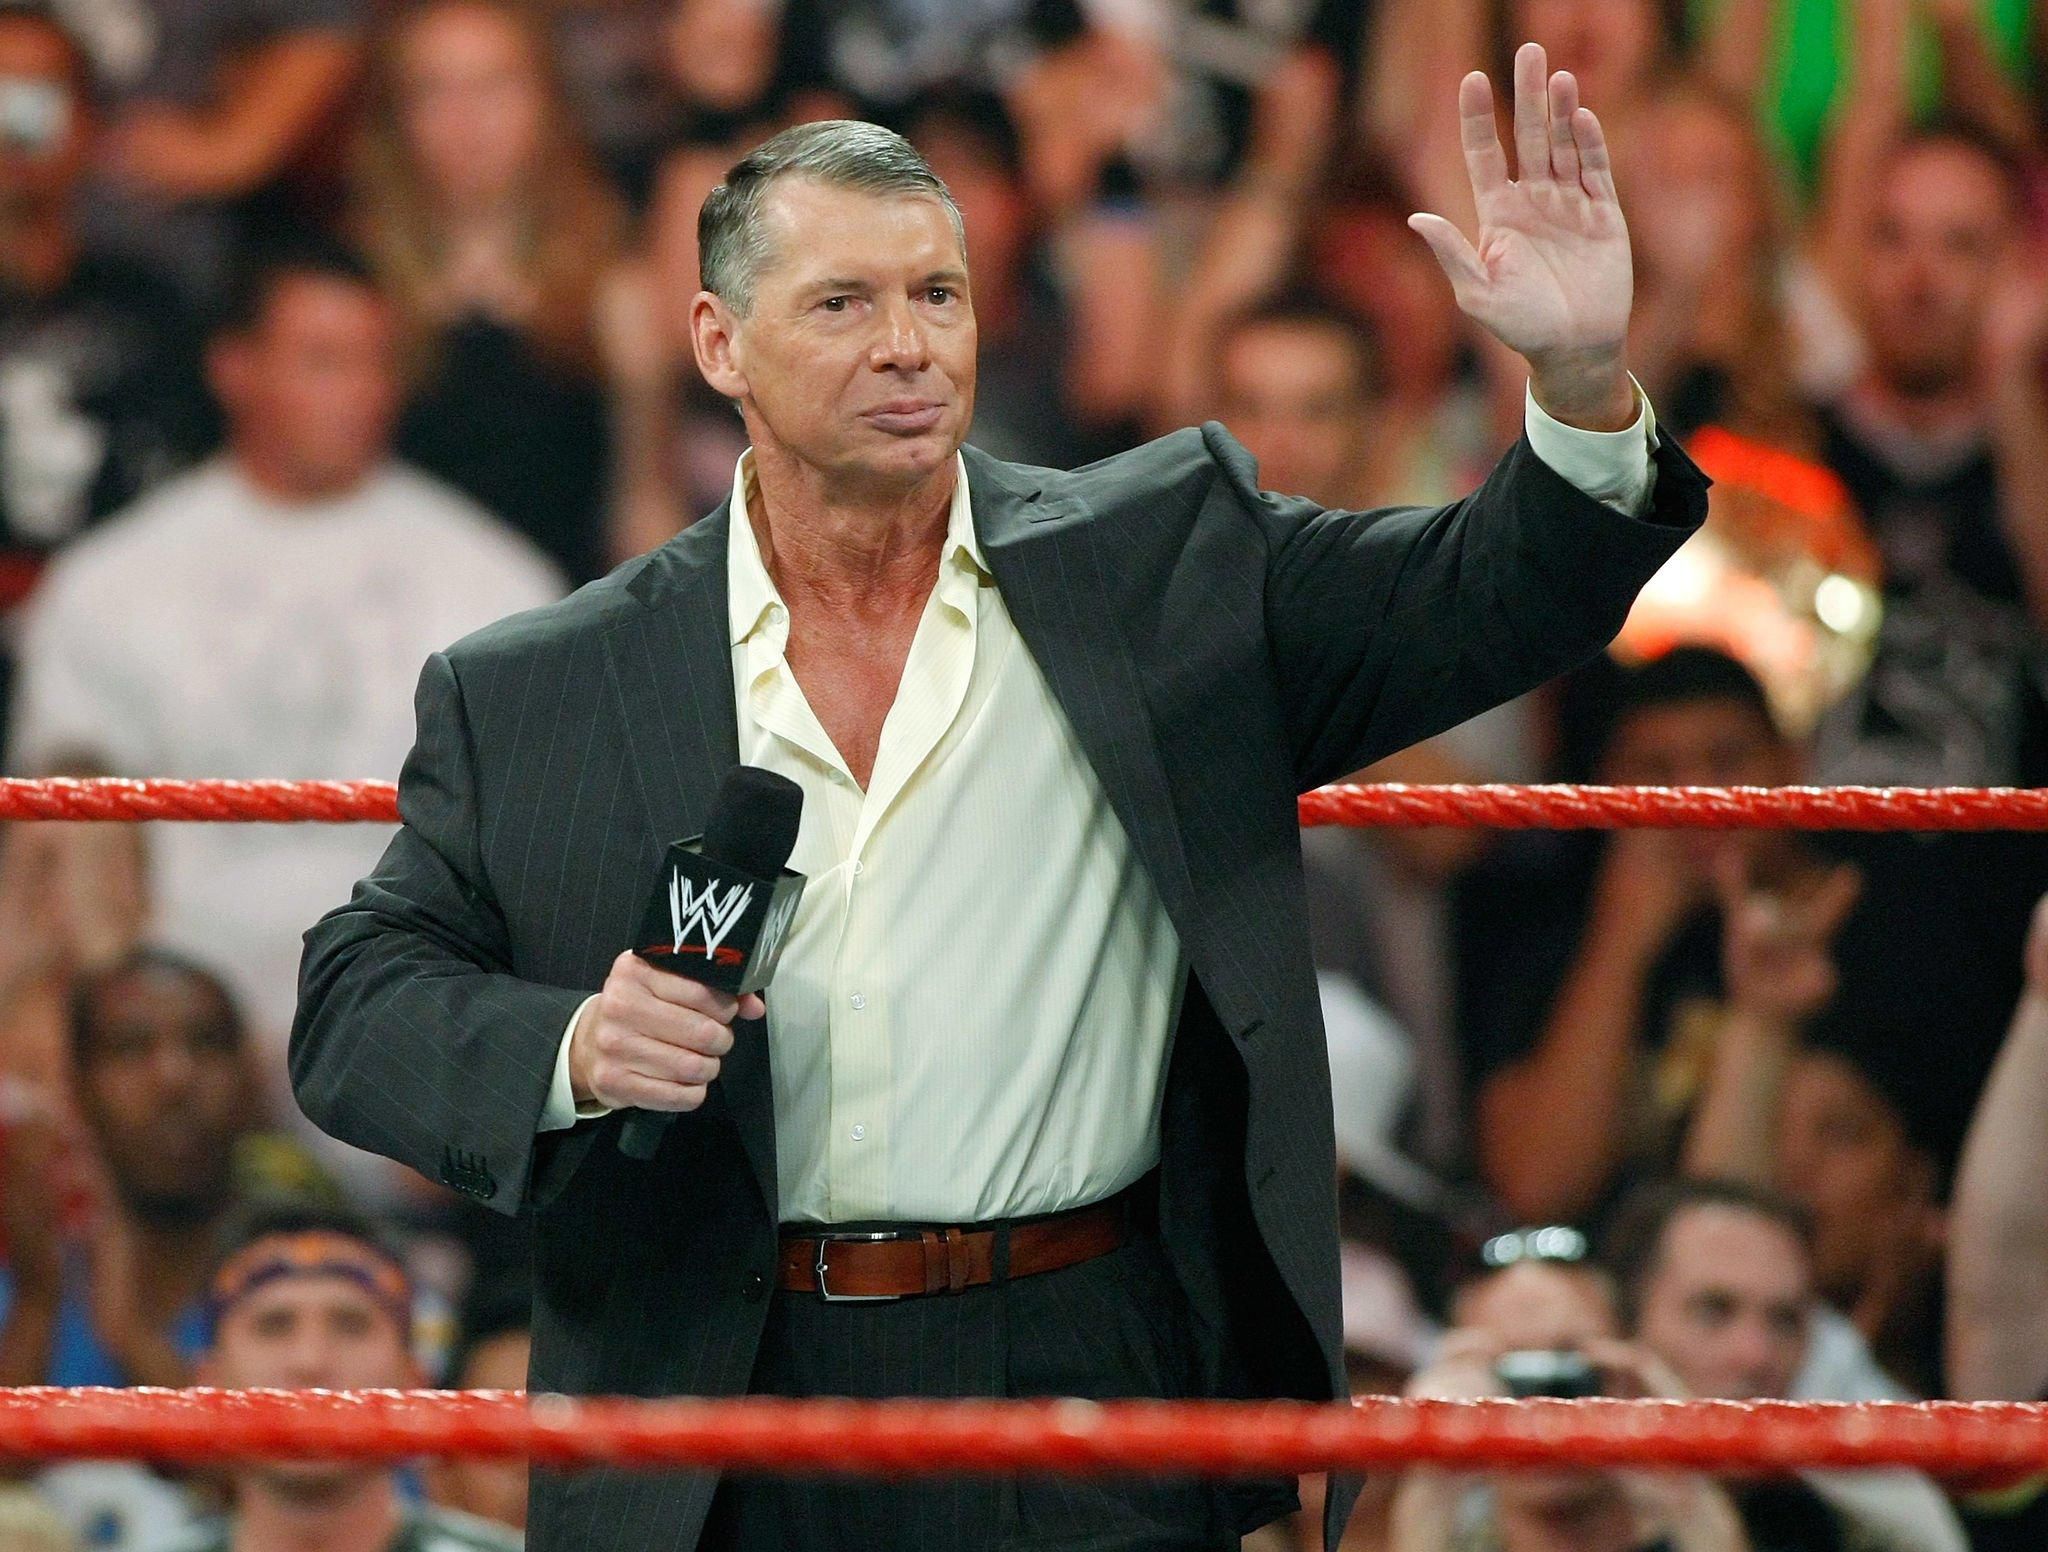 Vince McMahon is the richest sportsman in the world in 2023